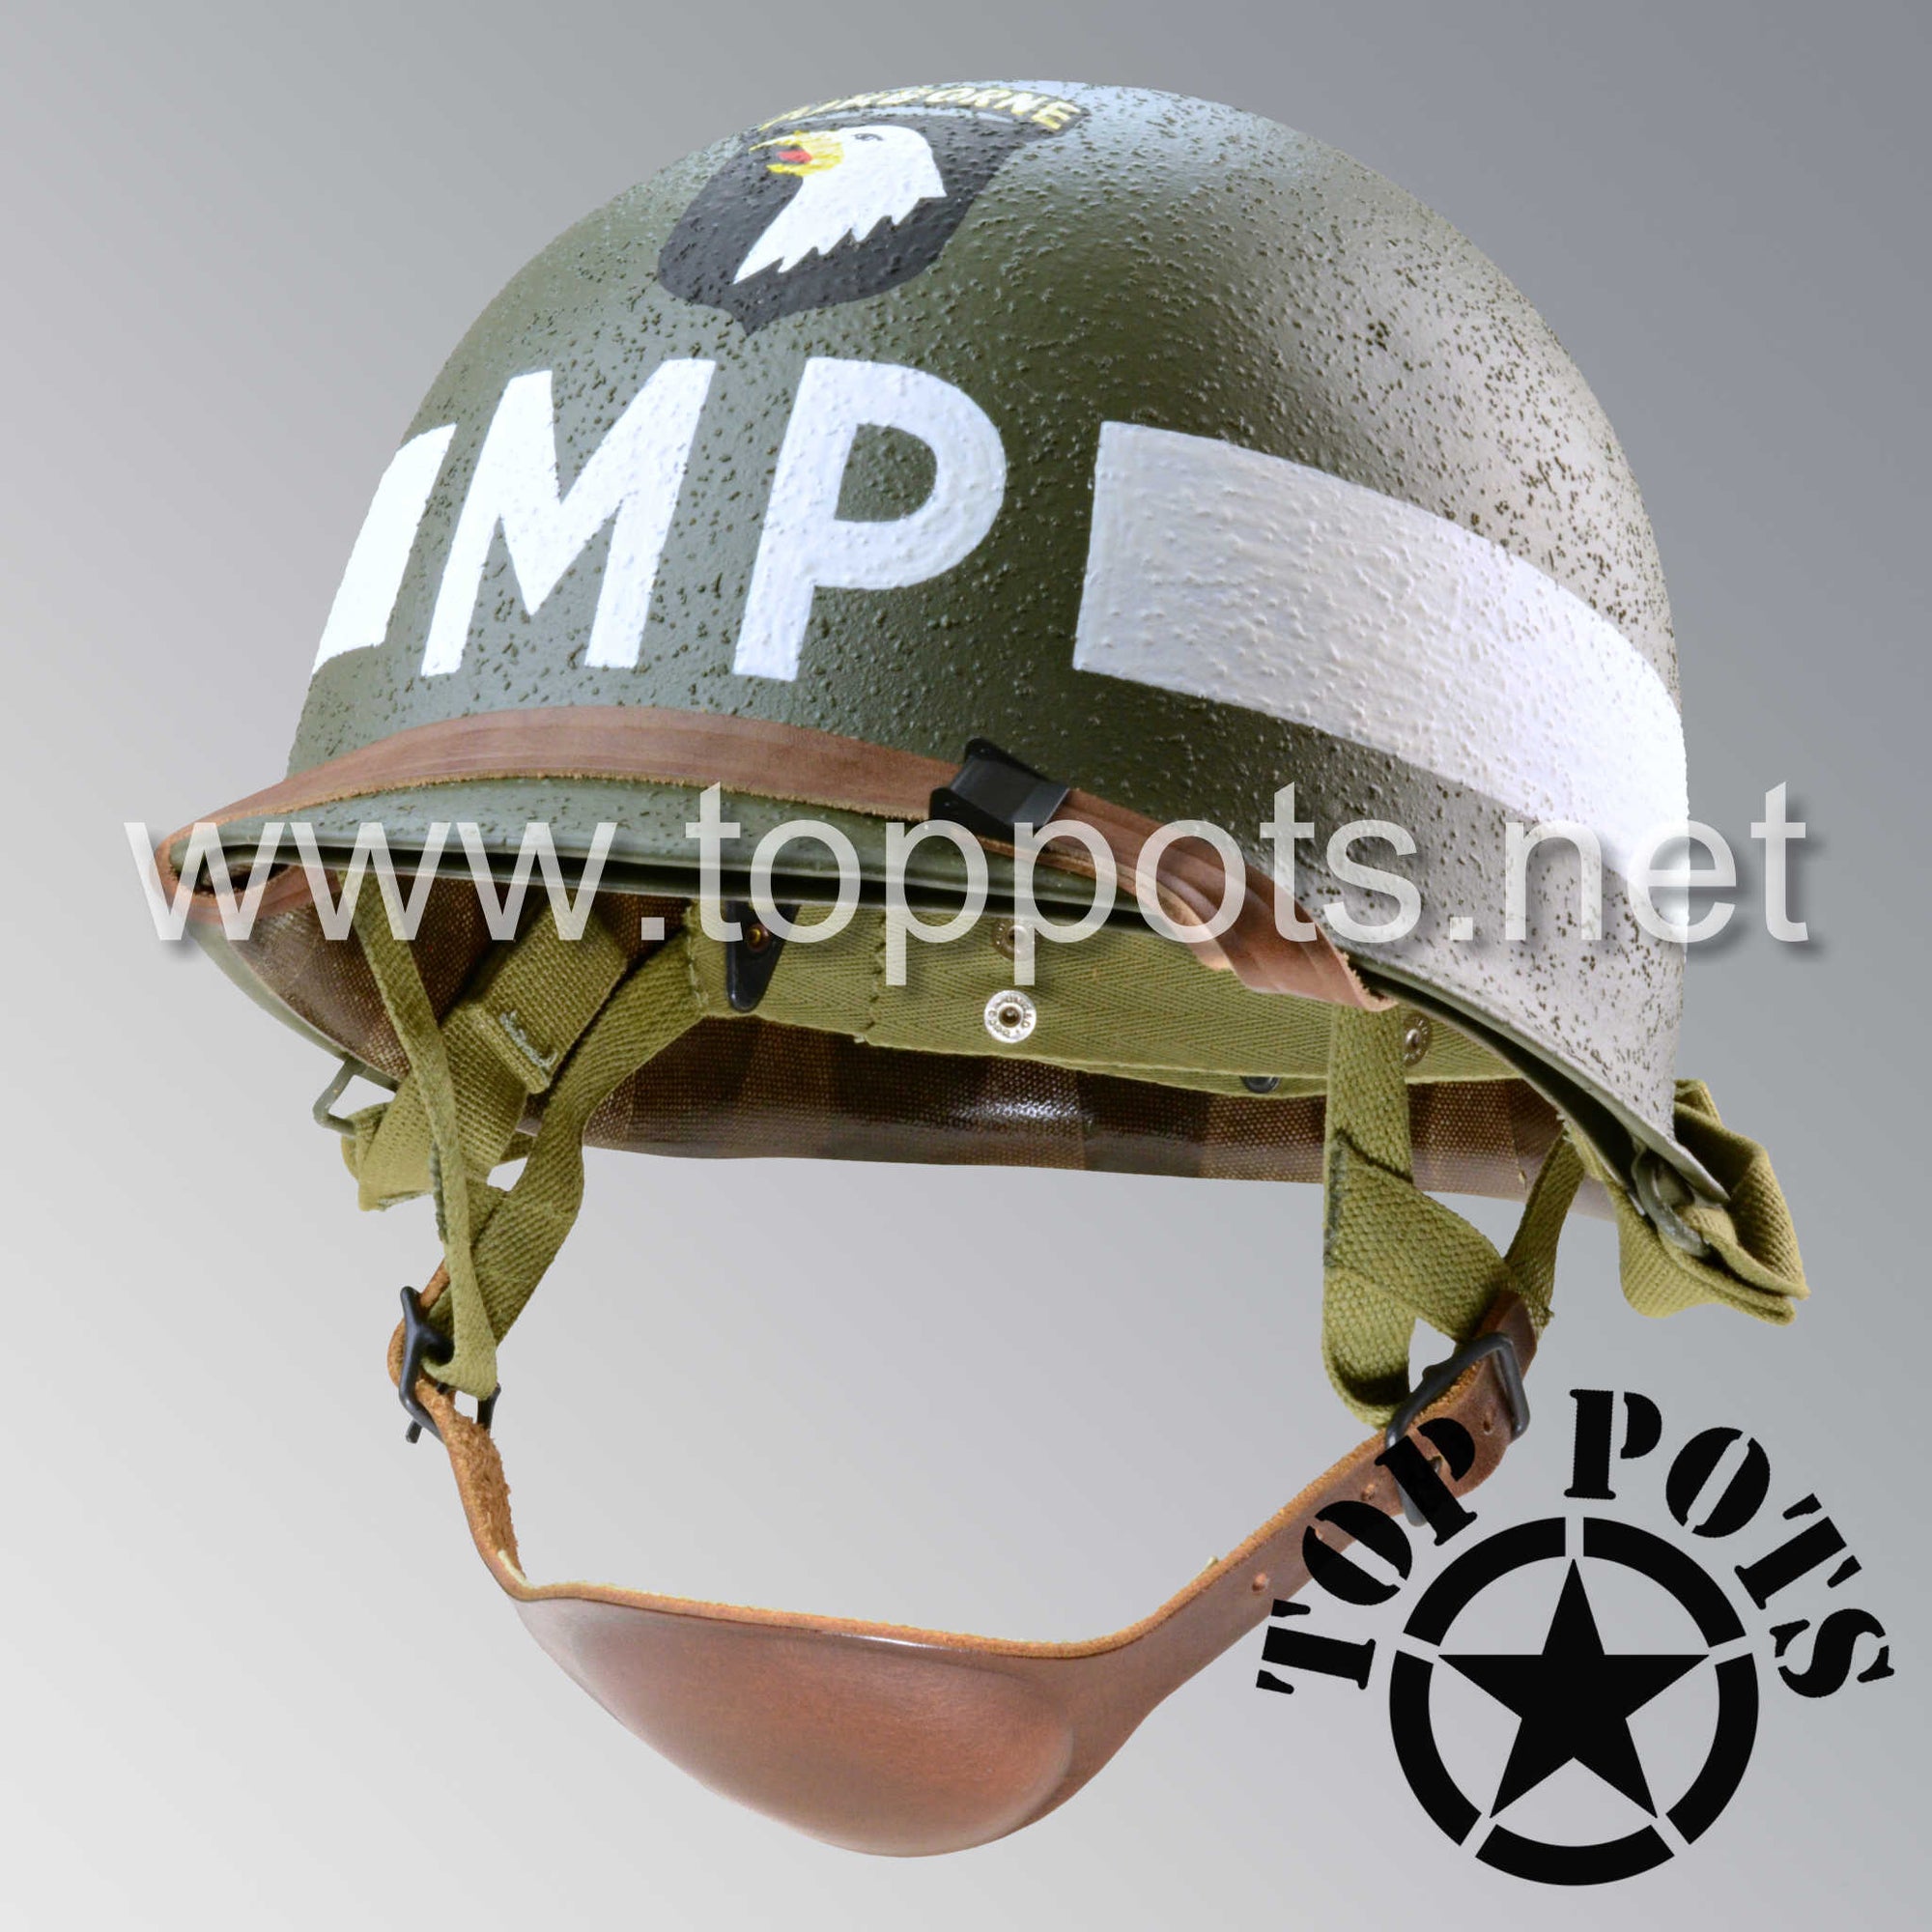 WWII US Army Restored Original M1C Paratrooper Airborne Helmet Swivel Bale Shell and Liner with 101st Airborne MP Military Police Emblem